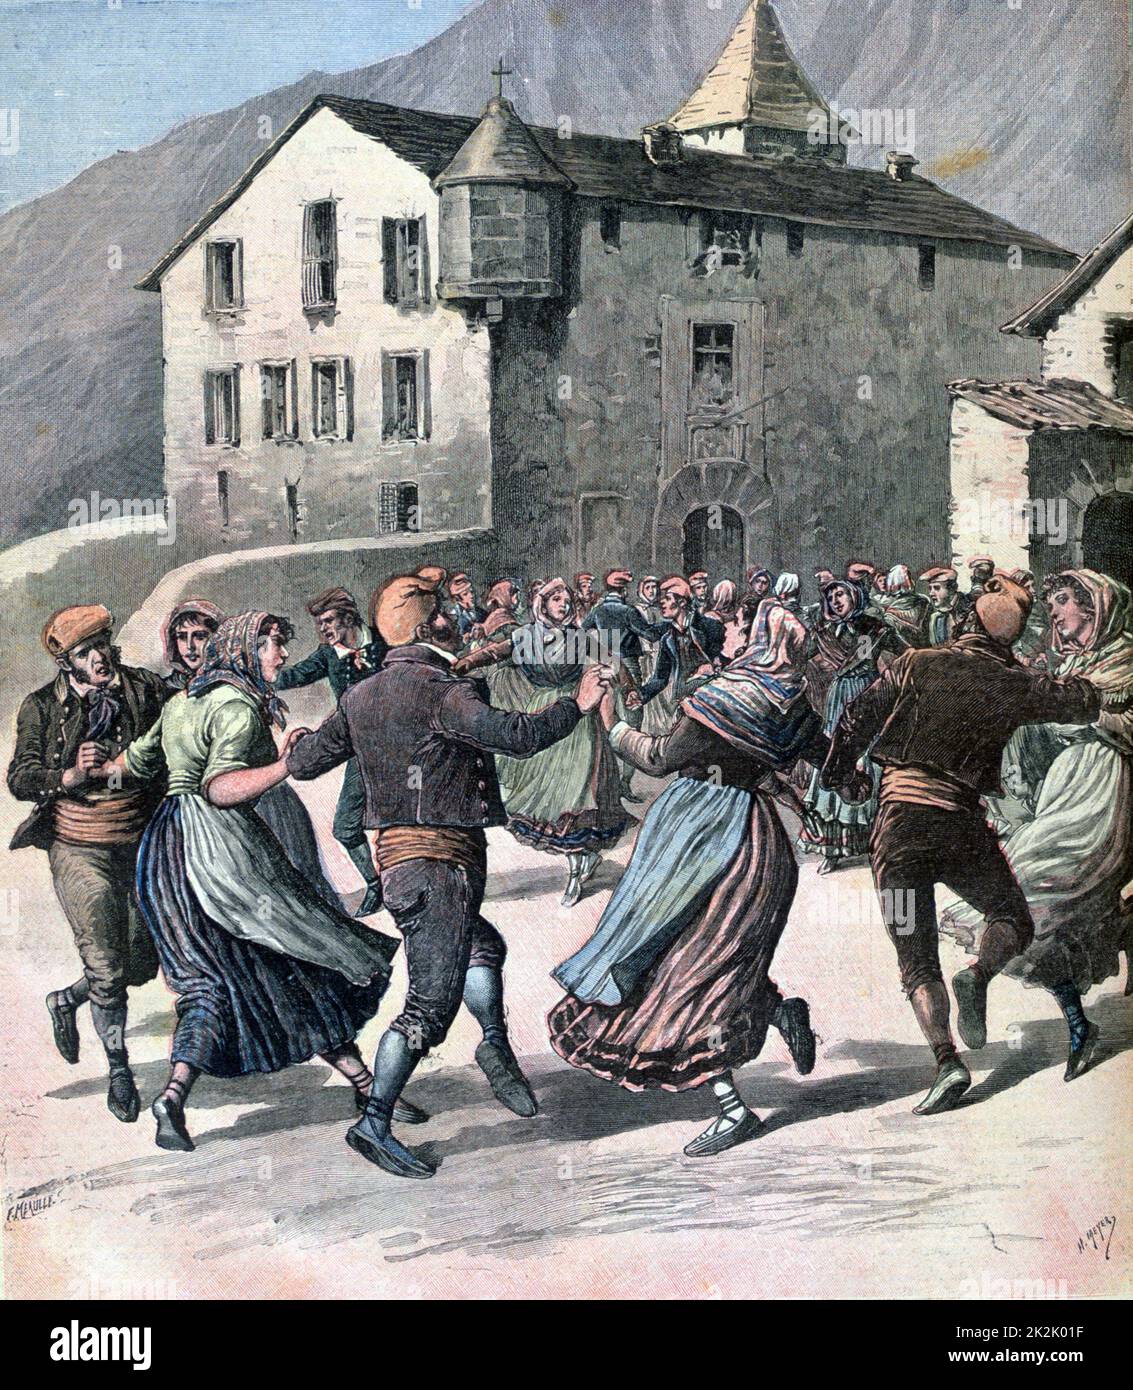 People of Andorra, a Principality in the Pyrenees, dancing the Farandole, a chain community circular dance of medieval origins. From 'Le Petit Journal', Paris, 11 April 1901. Stock Photo